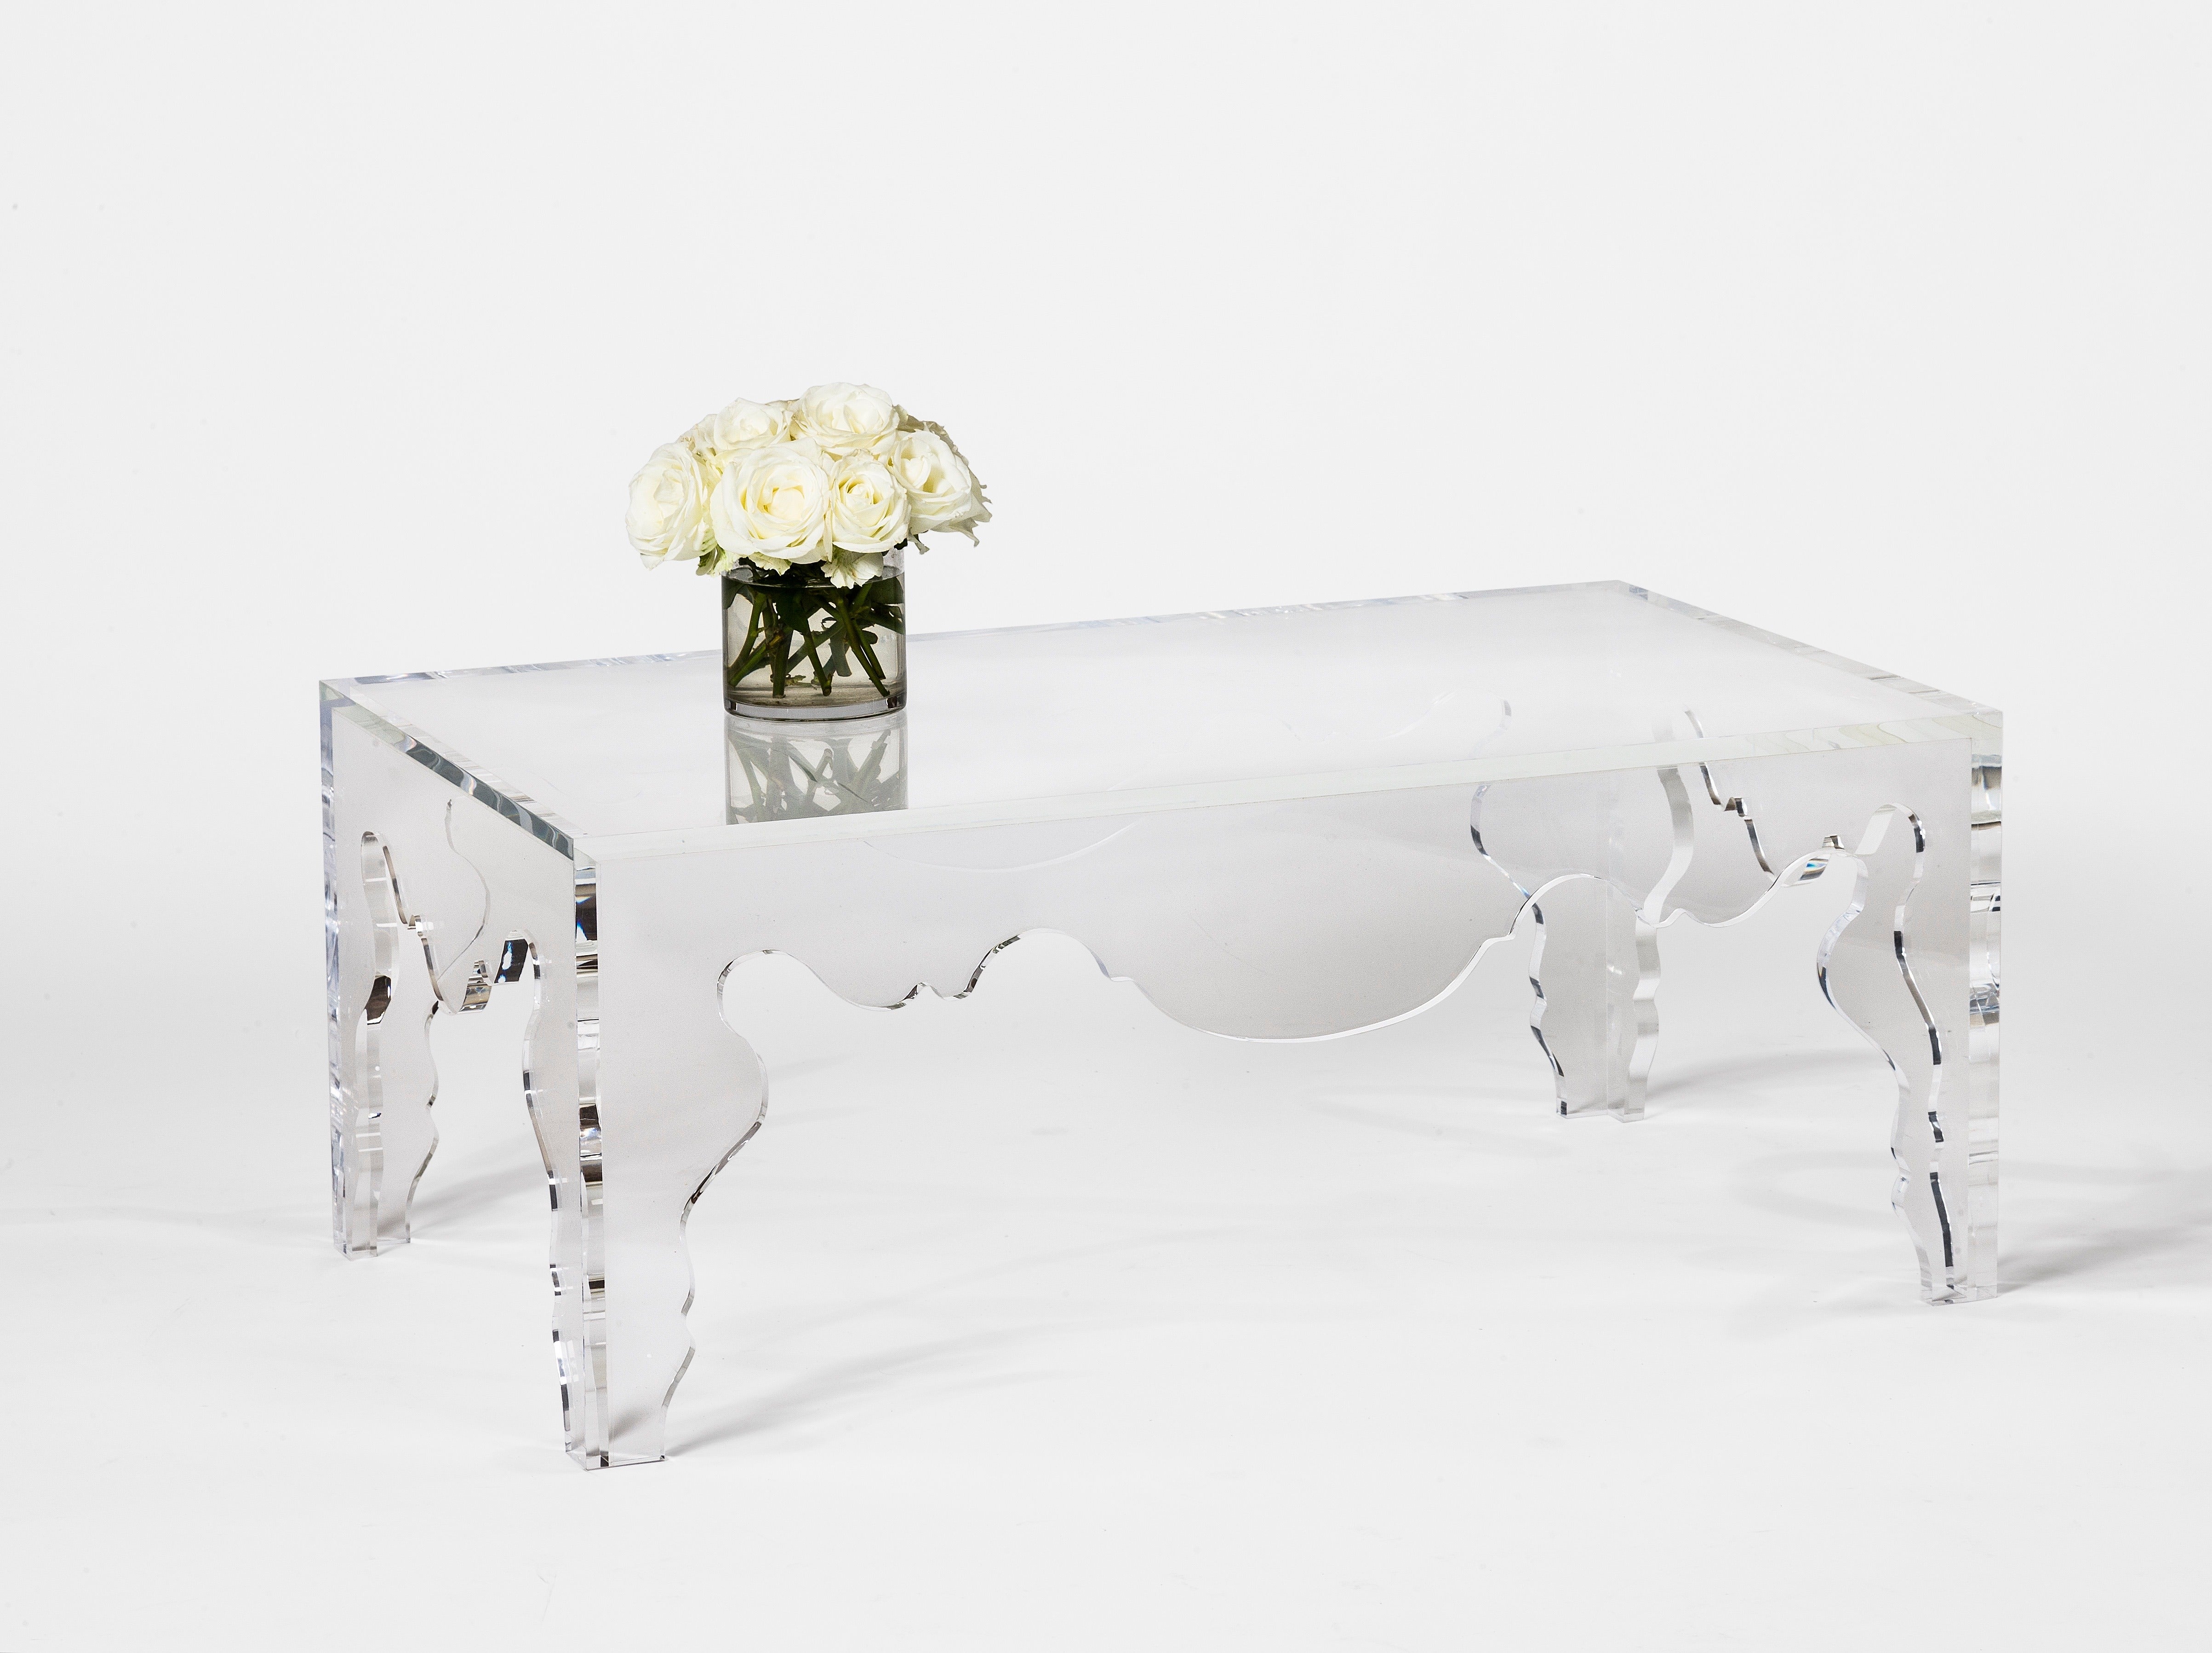 Bringing a modern edge to Classic design, this acrylic Rococo coffee table from the custom Tara Shaw Maison collection will make a statement in any space. Pairs with acrylic Rococo console and martini tables. Handcrafted in New Orleans.

Custom